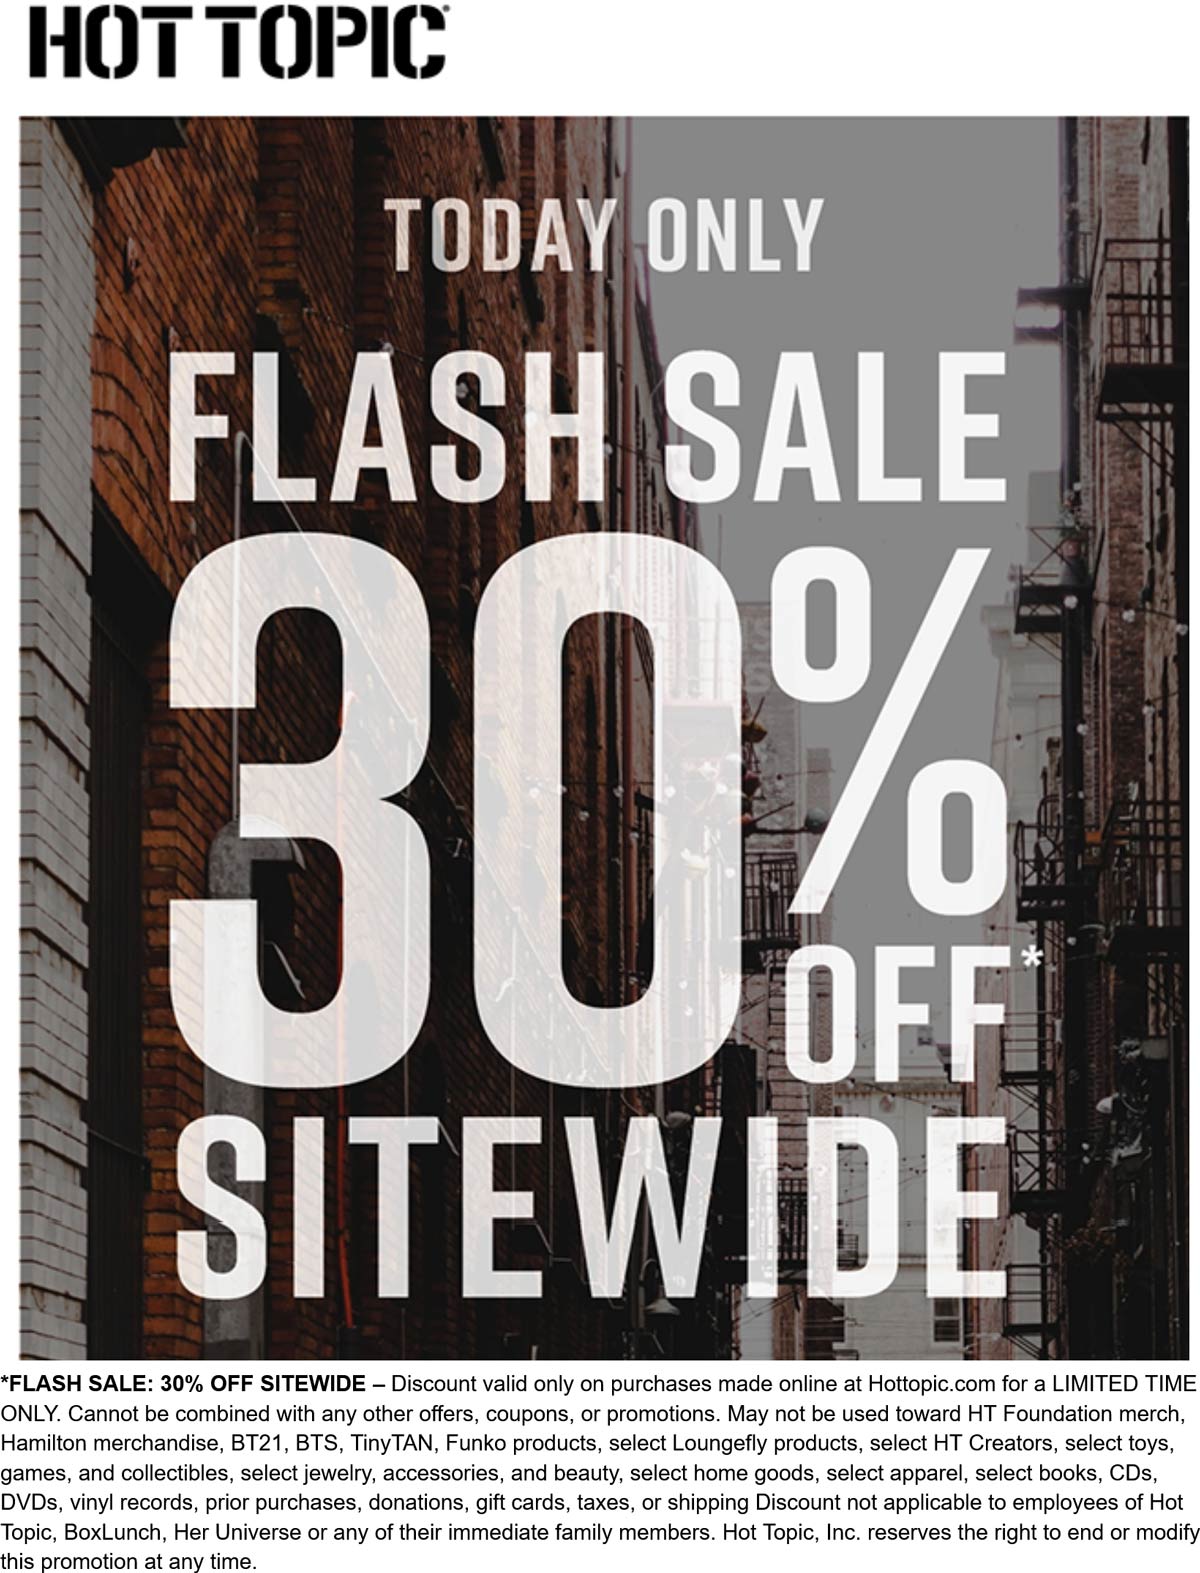 Hot Topic stores Coupon  30% off everything online today at Hot Topic #hottopic 